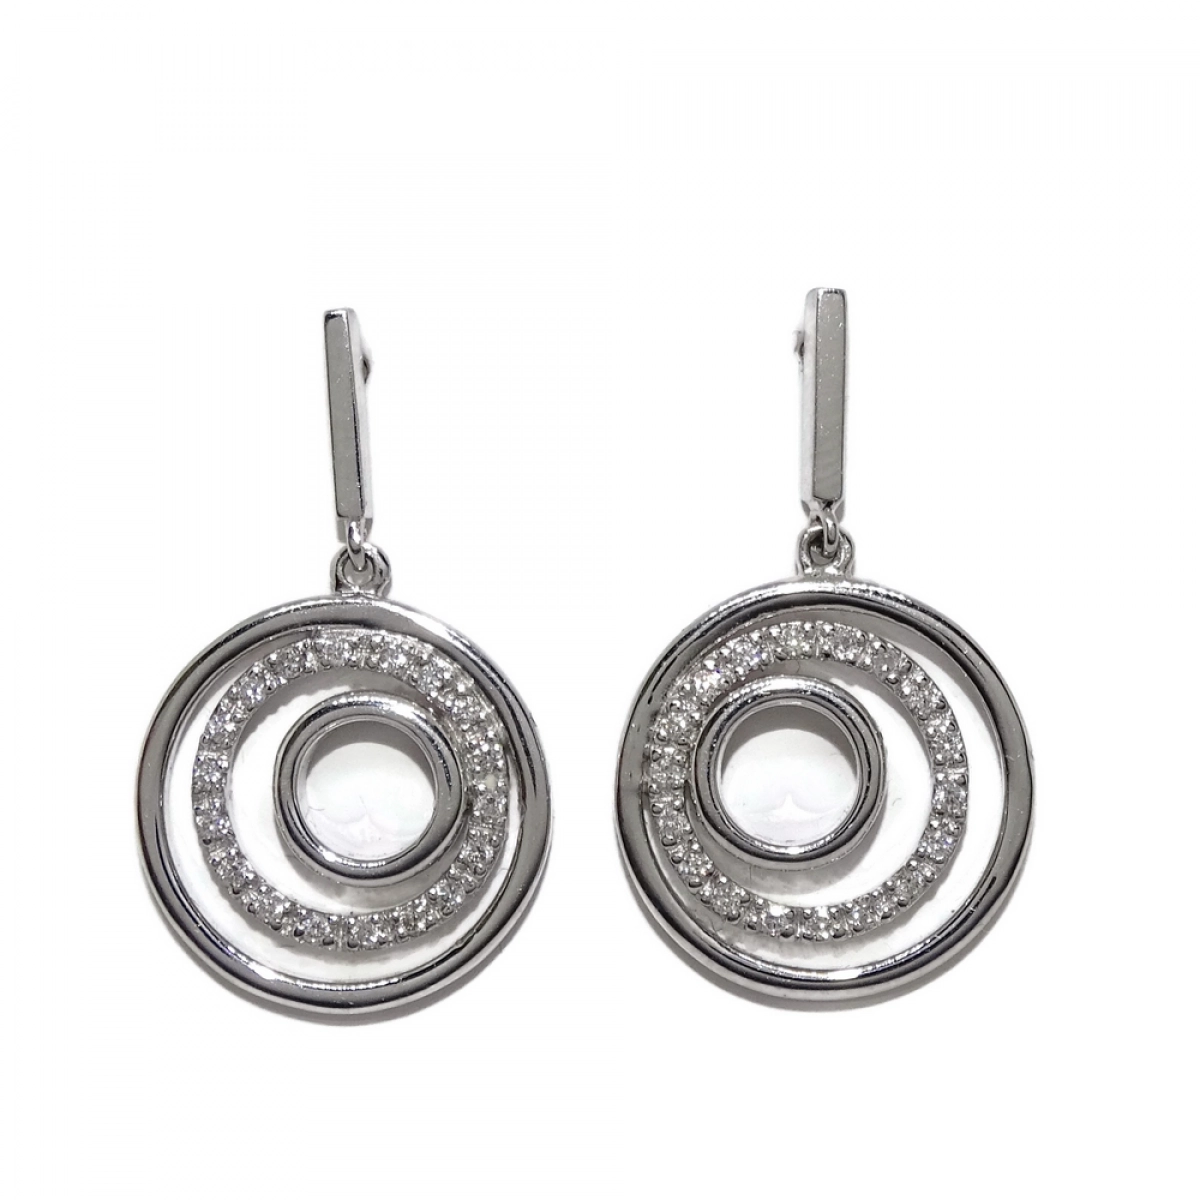 PRECIOUS EARRINGS IN 18K WHITE GOLD WITH DIAMONDS. NEVER SAY NEVER